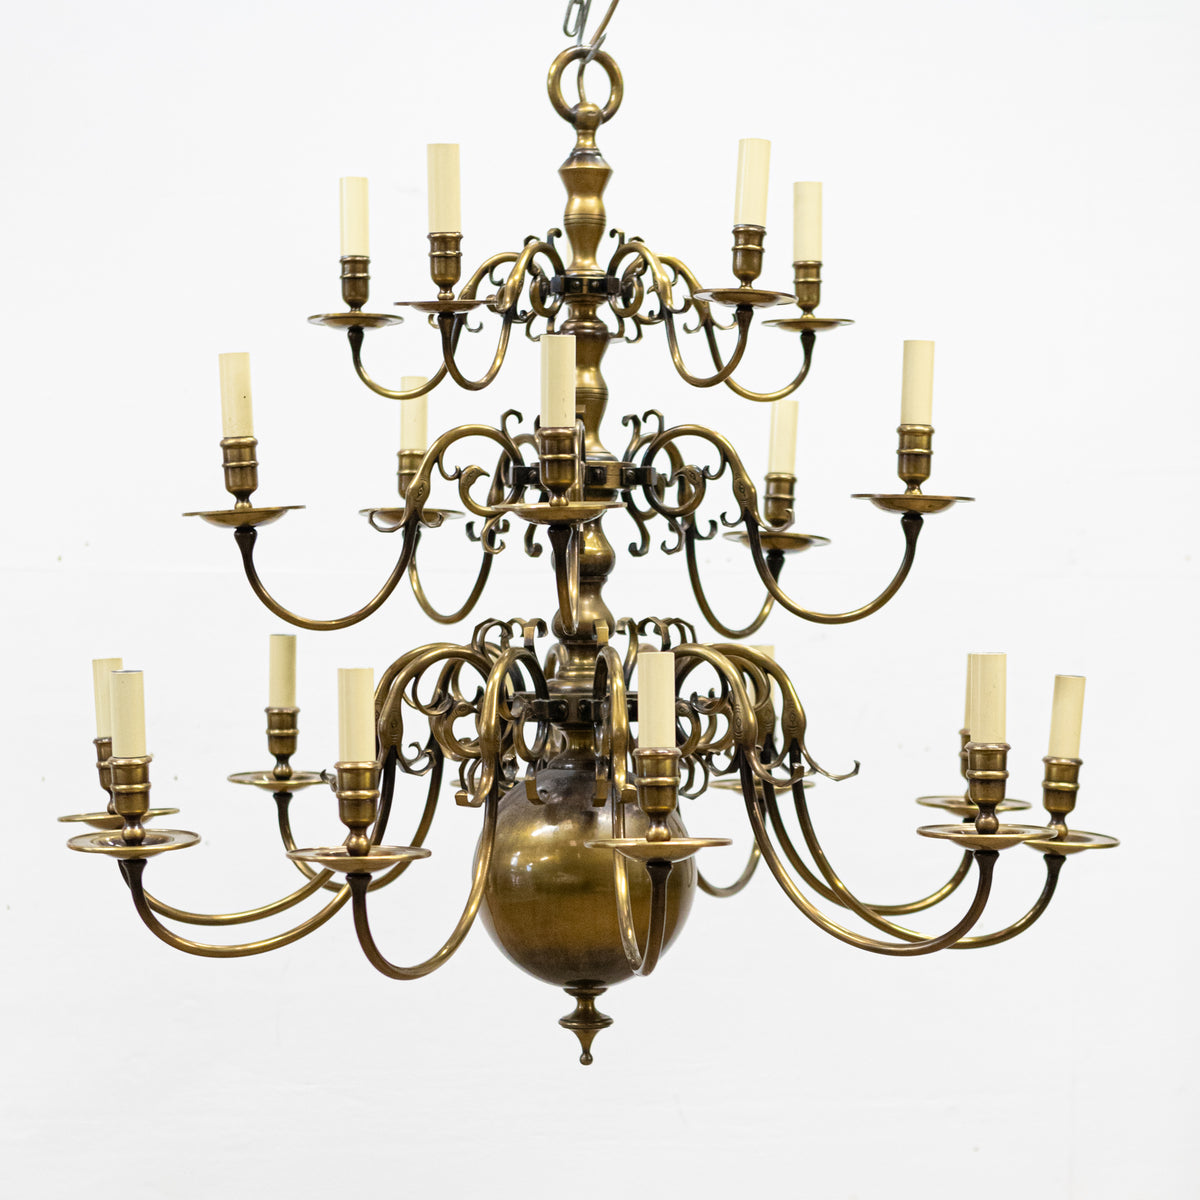 Large Flemish Style 3 Tier Brass Chandelier | Lambeth Palace | 2 Available | The Architectural Forum